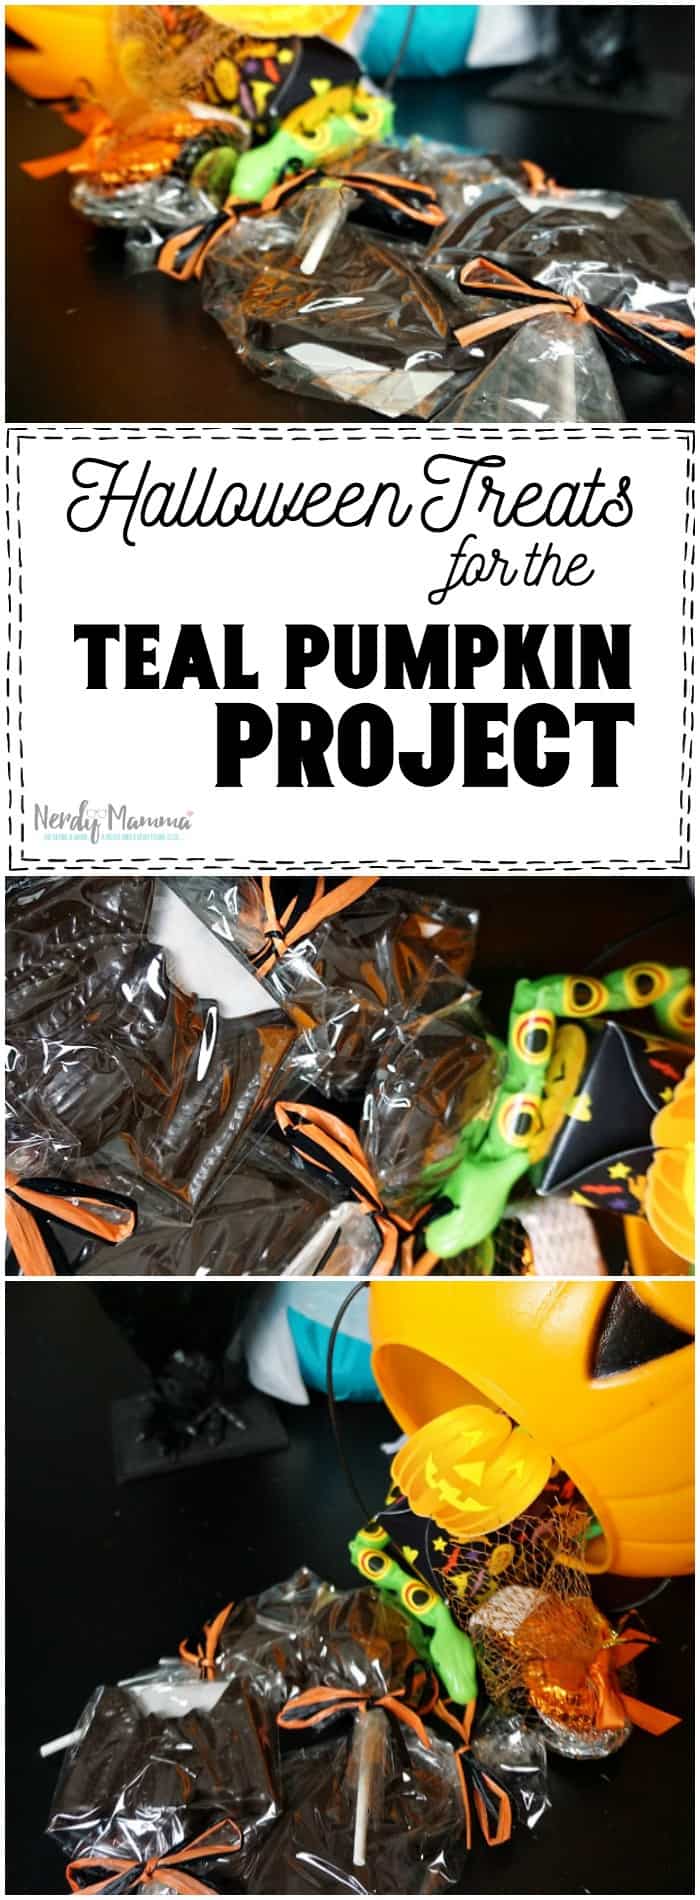 I really needed this list of Halloween Treat Ideas for the Teal Pumpkin Project to share with my neighbors and friends. Just as a reminder.